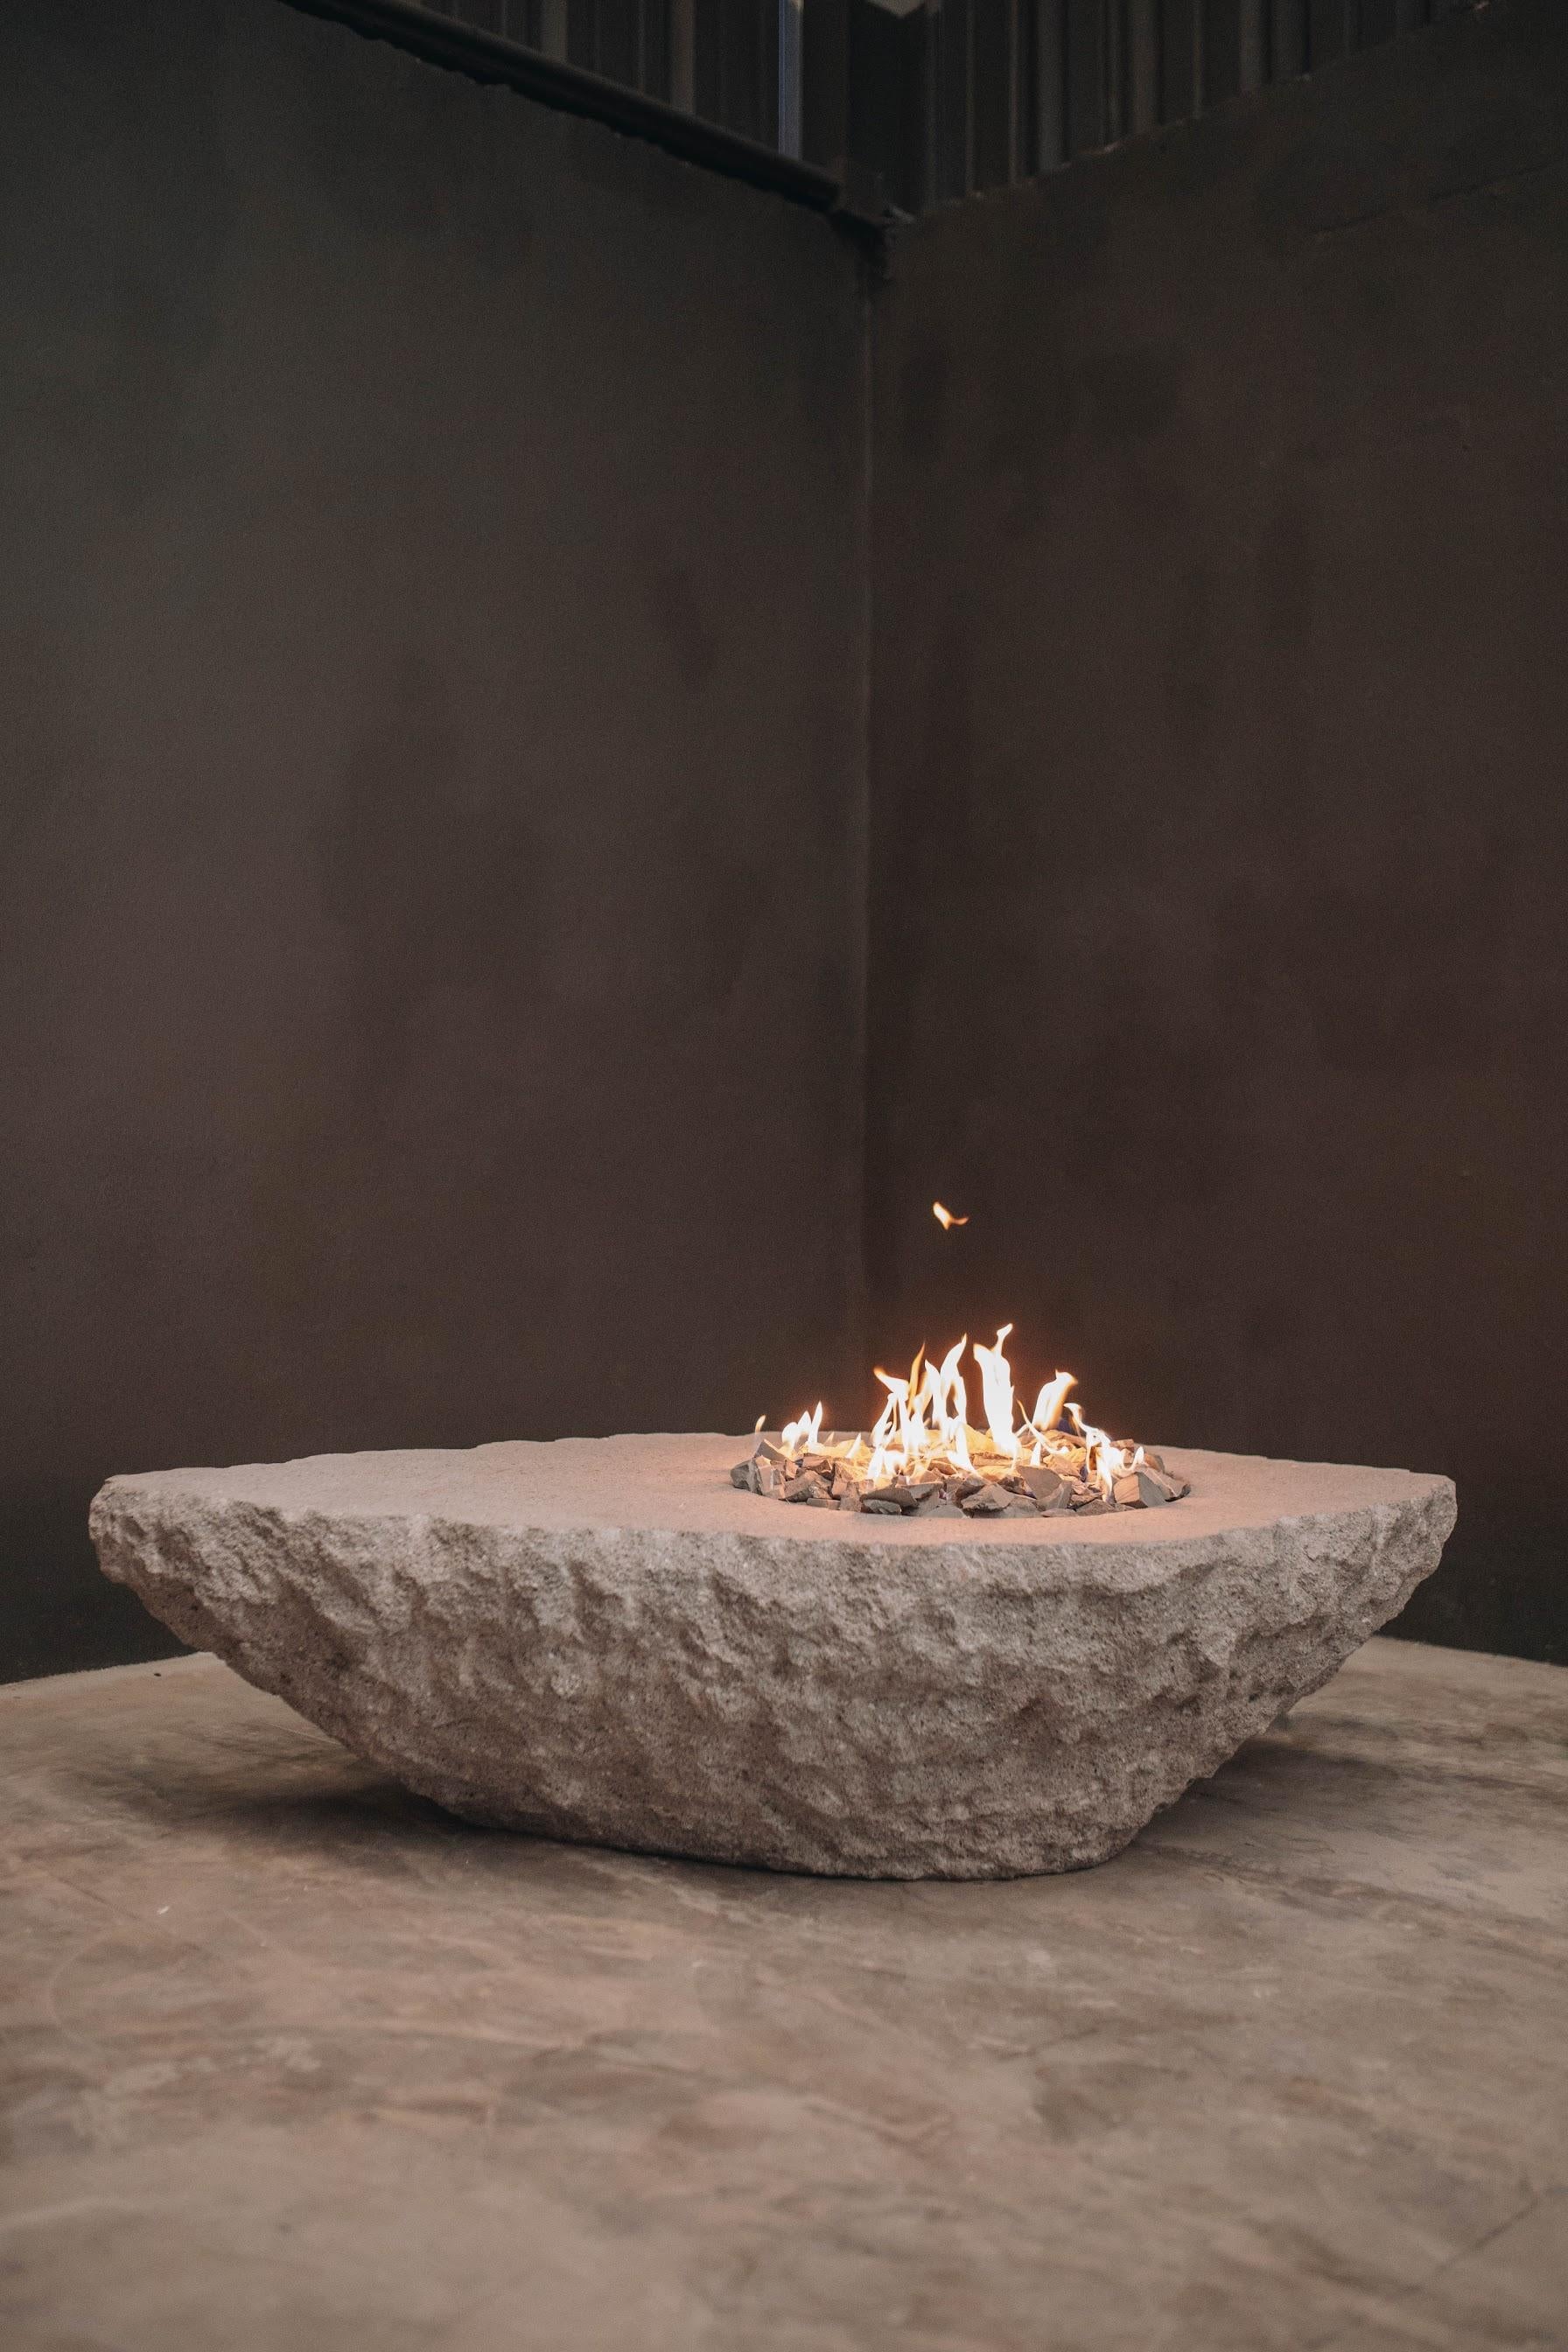 Prometeo fire table by Andres Monnier Treko Concrete
Dimensions: 150 x 90 x H 45 cm
Materials: Stainless steel. Quarry stone.
Technique: Hand-crafted. A mix of polished and unfinished looks. 
Weight: 340 kg

Prometeo fire table is a piece inspired